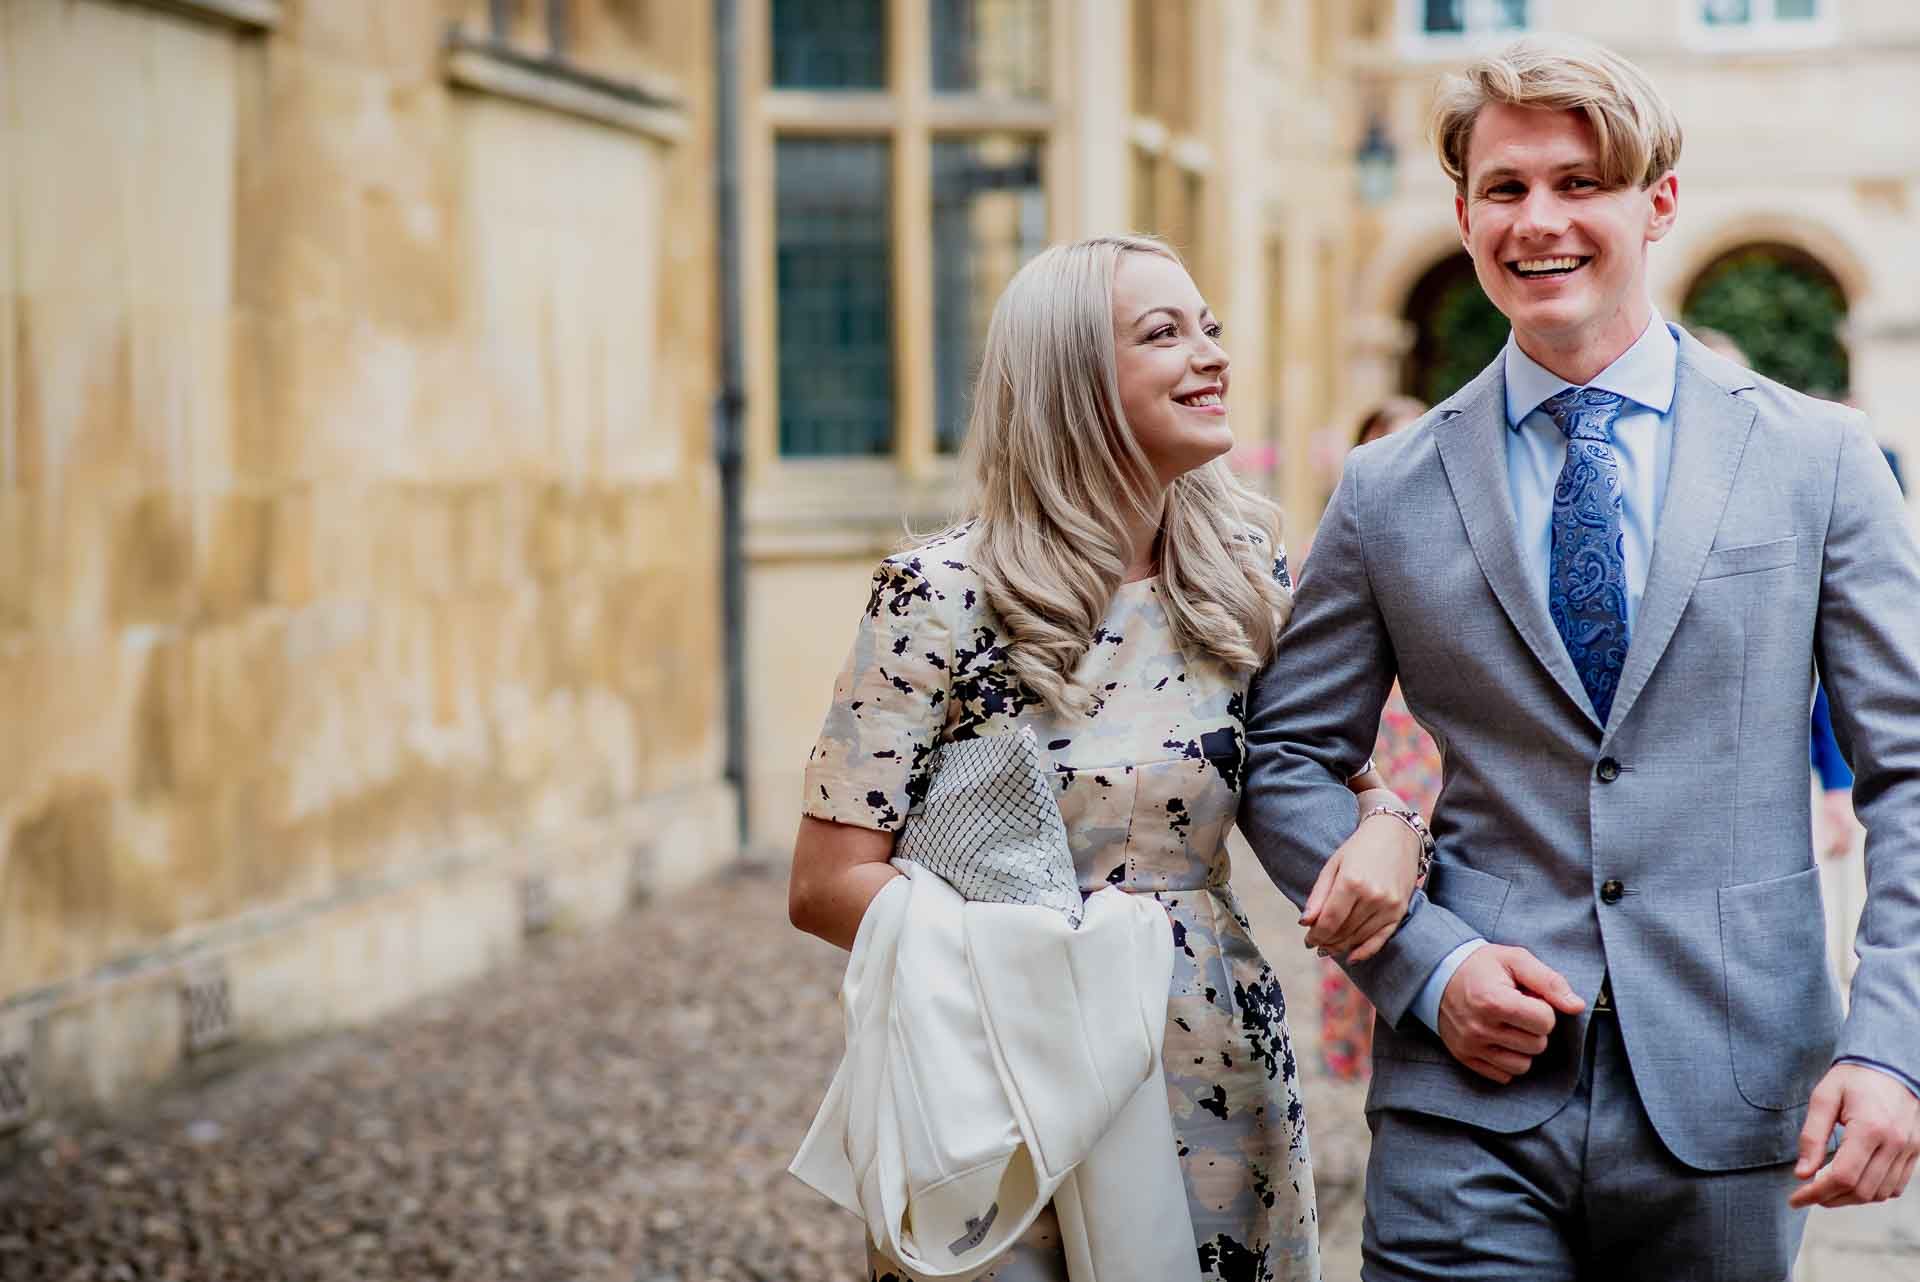 Natural candid photo of guests at Leah and Nic's wedding walking arm in arm and grinning. Photo thanks to Damien Vickers Photography.